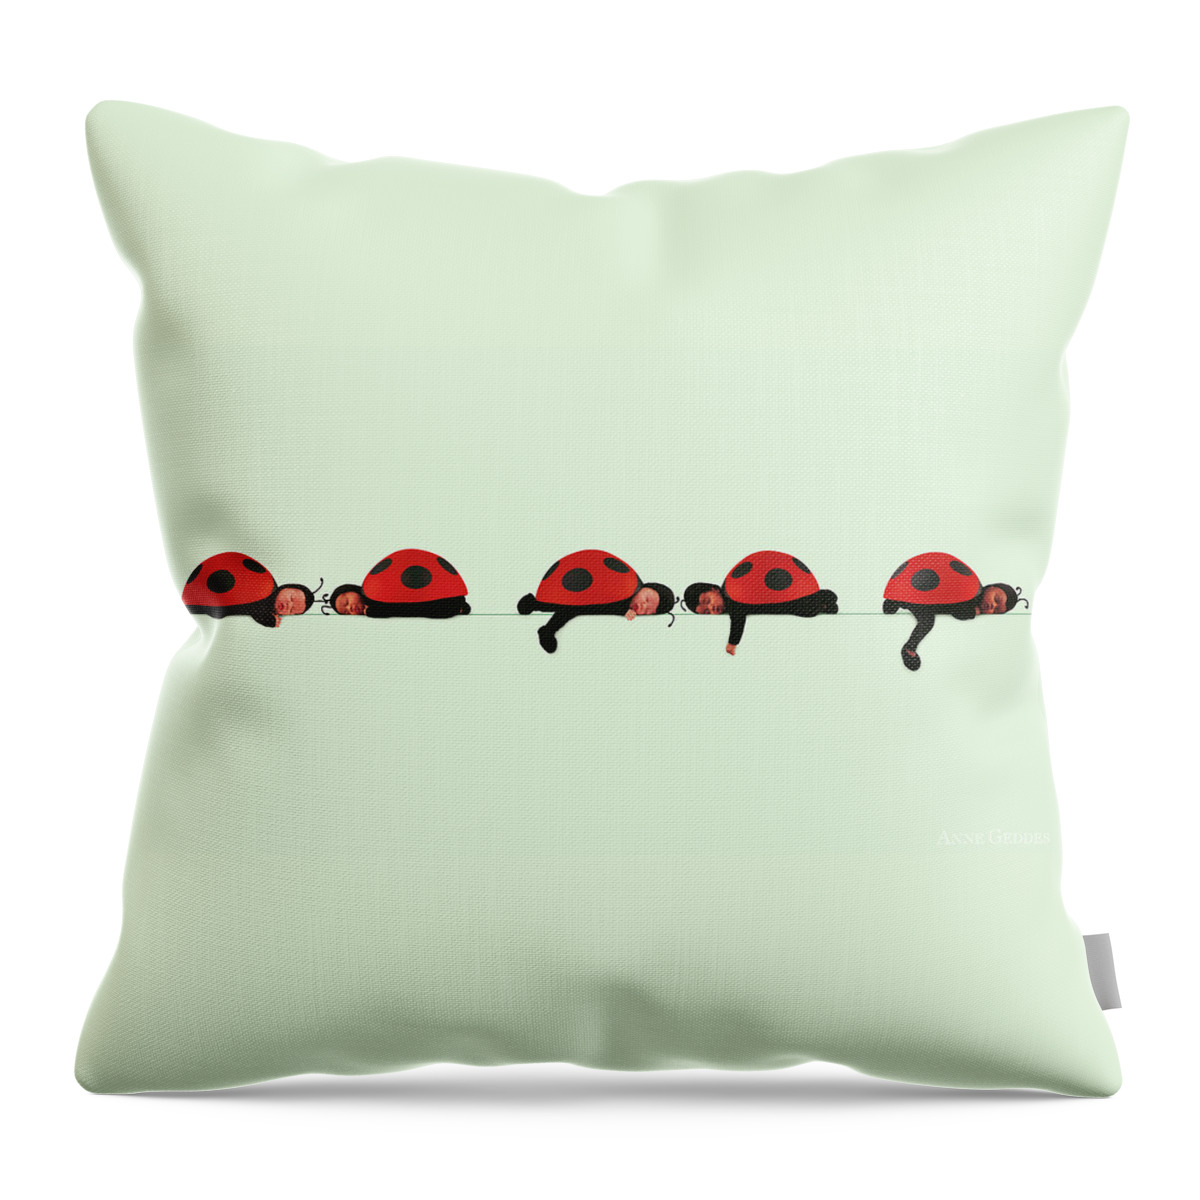 Ladybugs Throw Pillow featuring the photograph Ladybugs by Anne Geddes